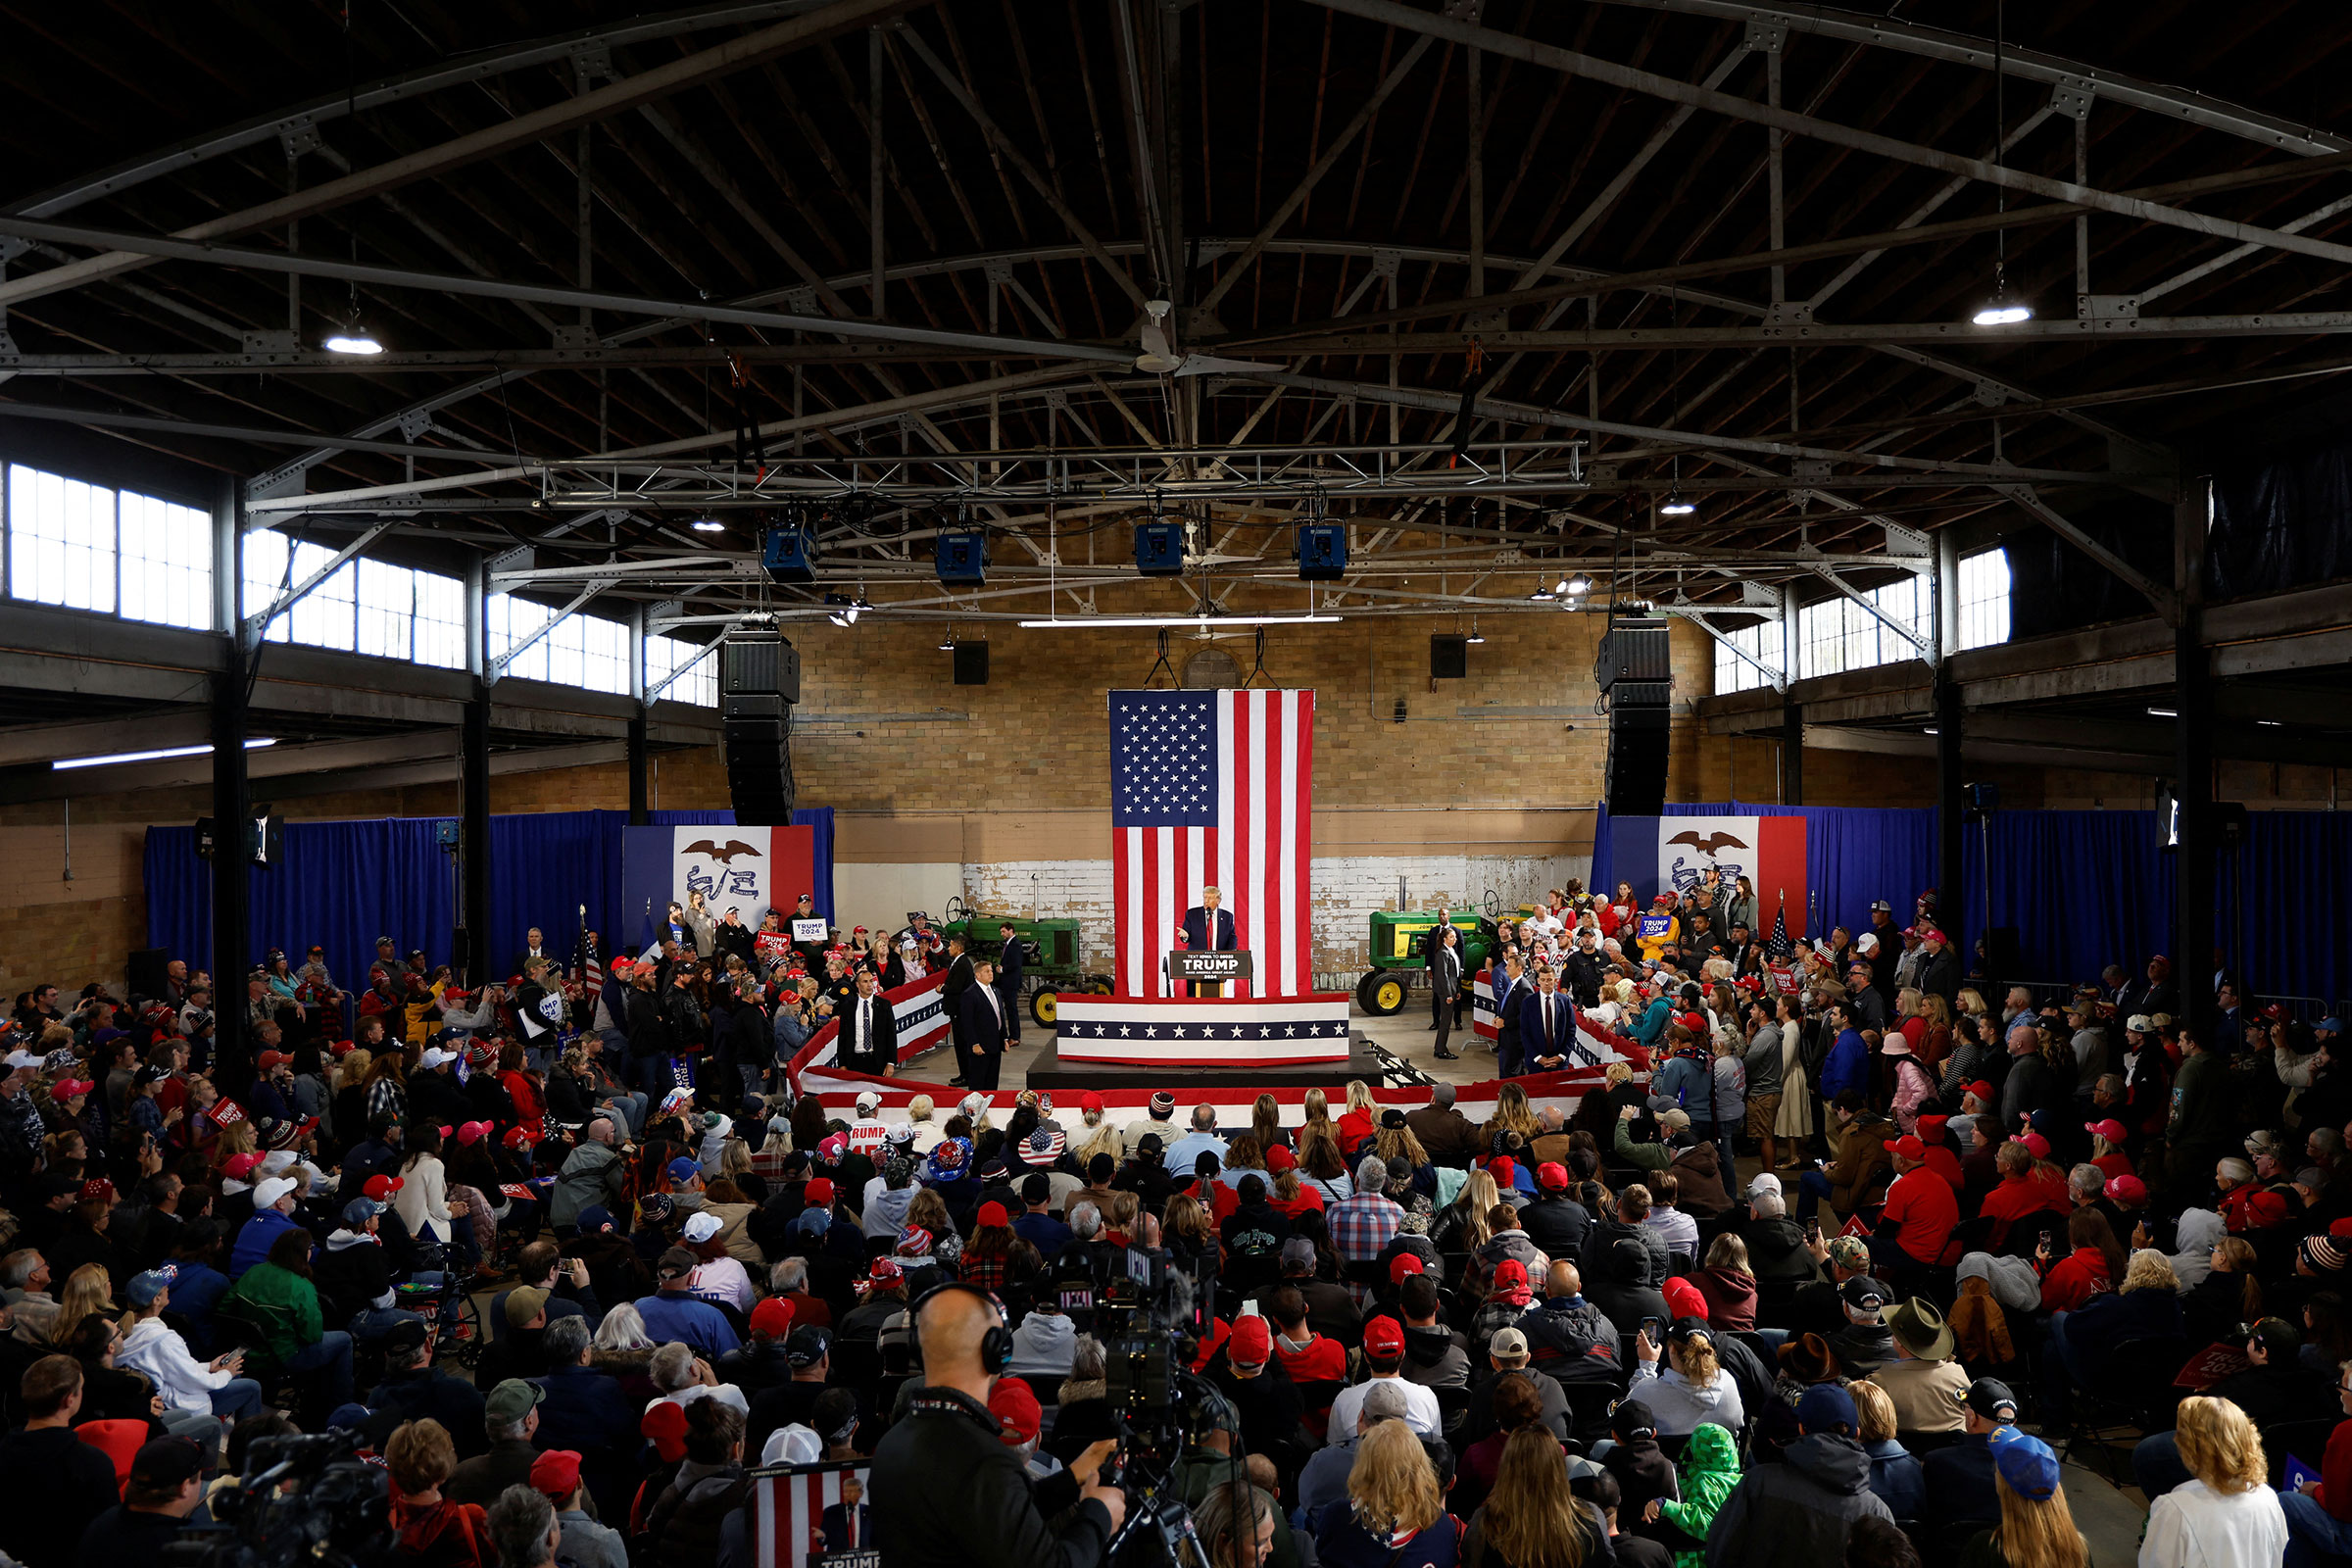 Donald Trump rallies with supporters at a "commit to caucus" event at the National Cattle Congress event space in Waterloo, Iowa, on October 7.